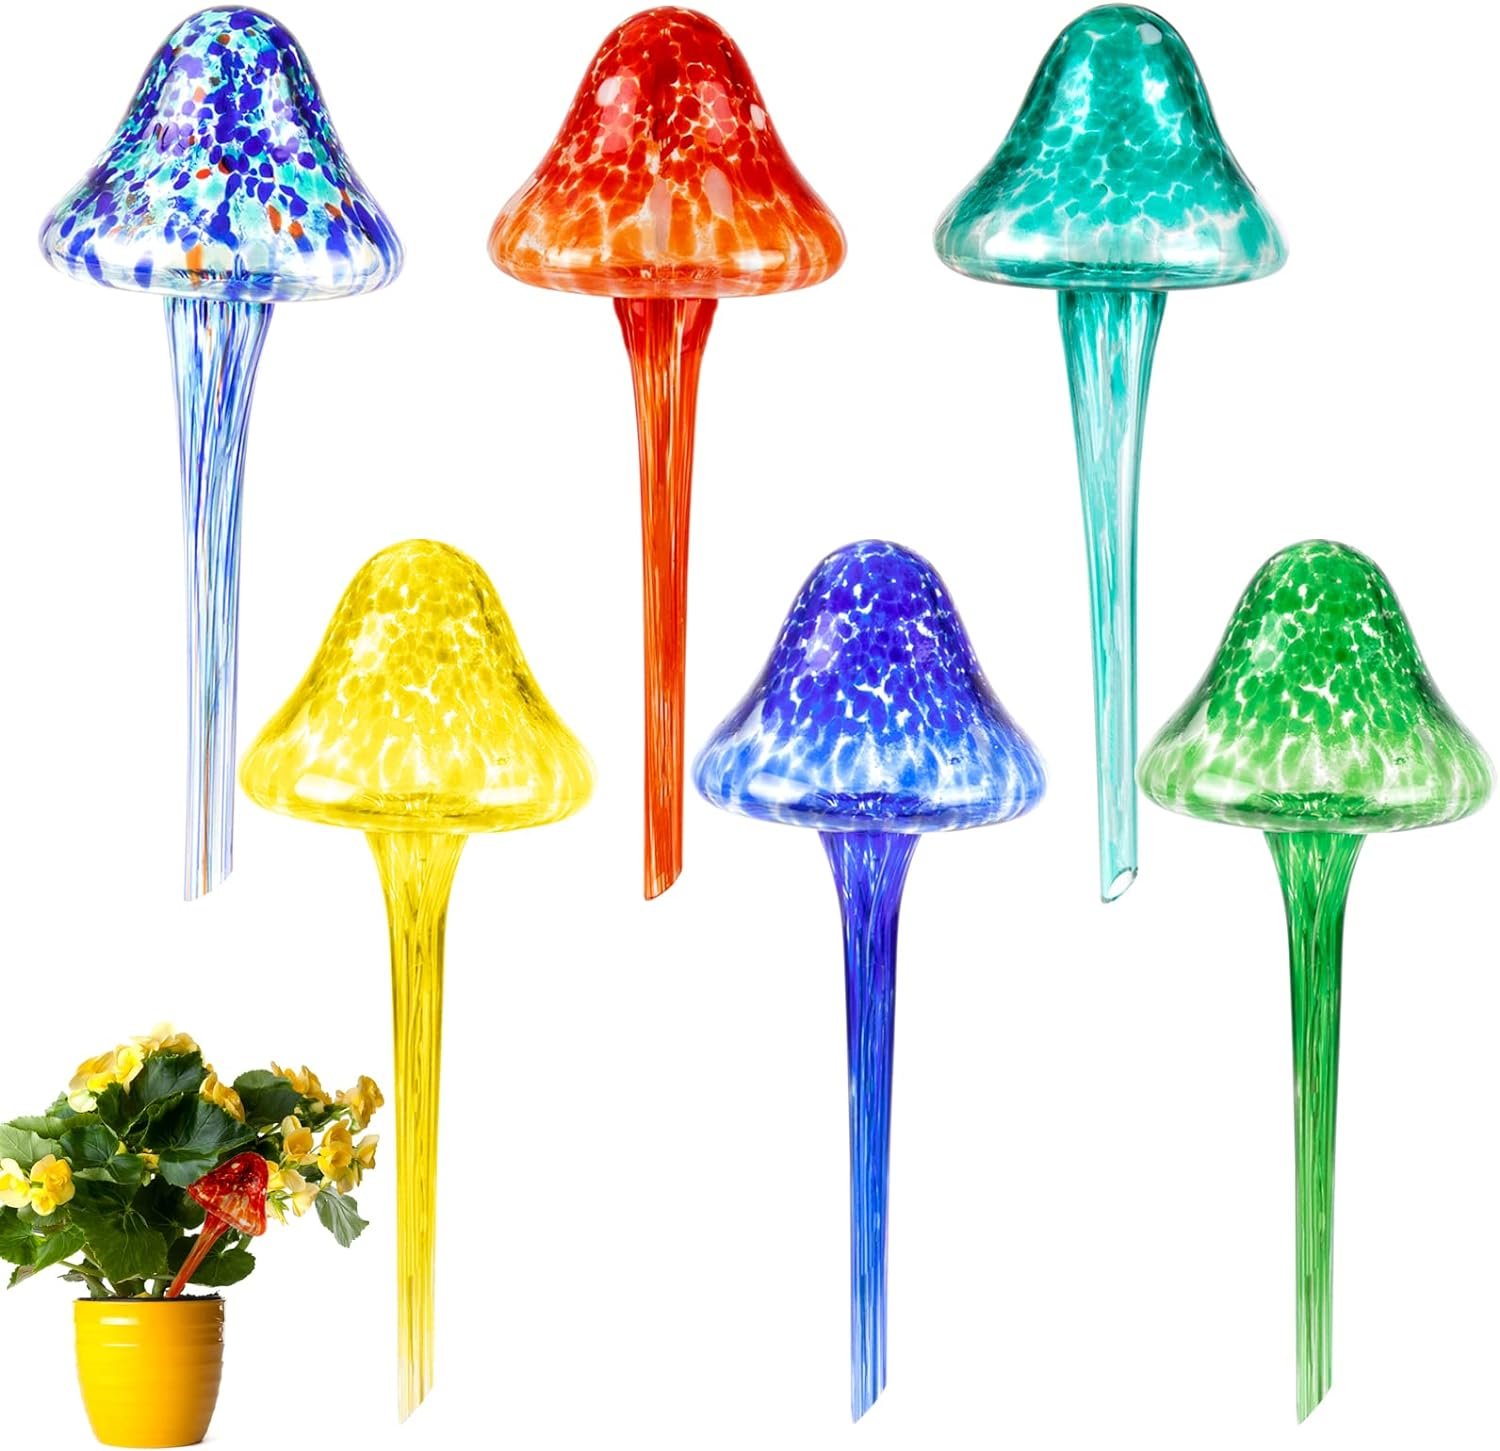 KintKita Plant Watering Globes Watering Bulbs Colorful Mushroom Glass Self Watering Stakes Drippers Water Spikes for Plants Watering Irrigation Device for Garden Indoor Outdoor (6 Pack)